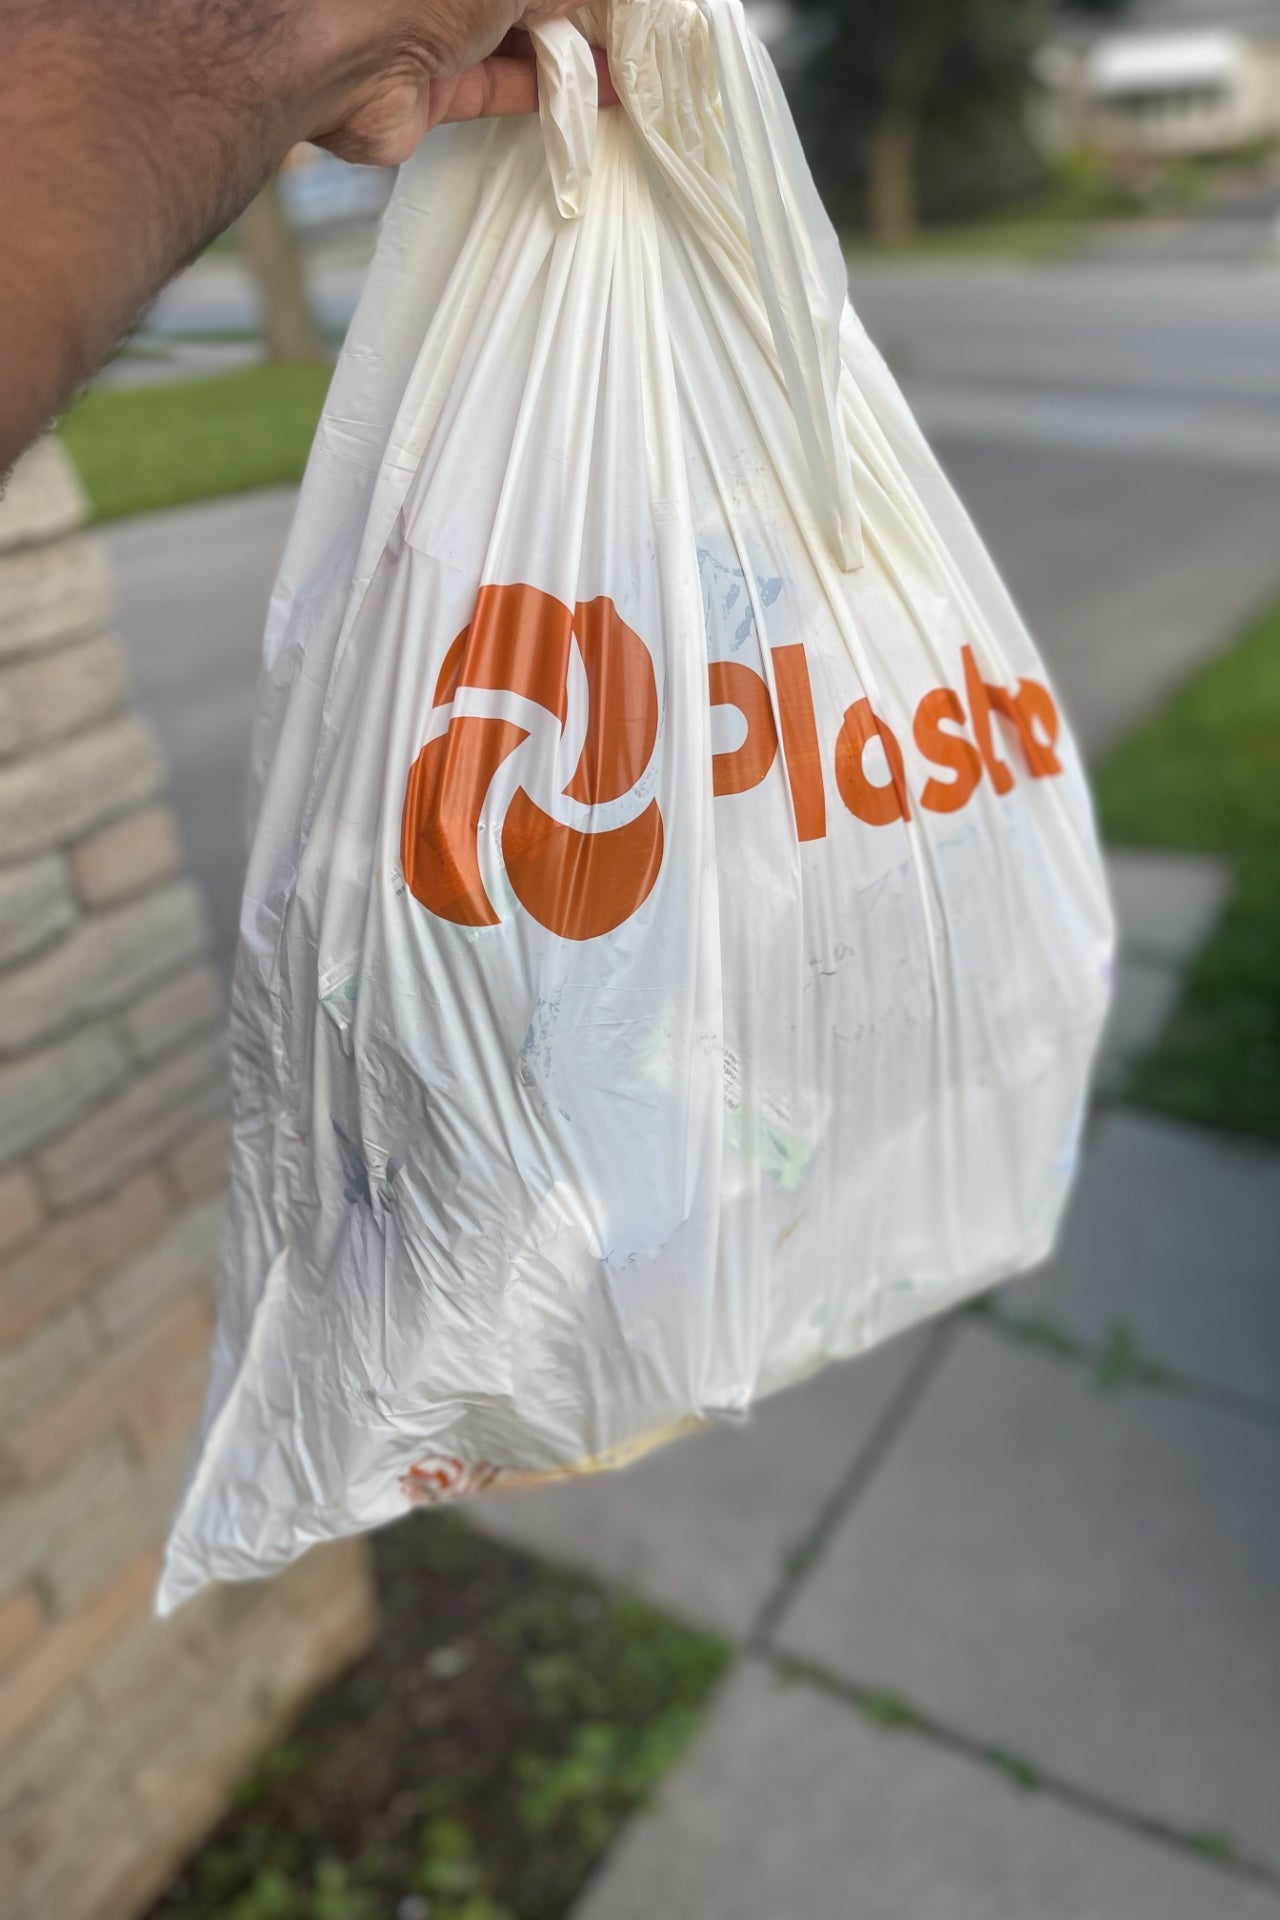 Taking Plastno biodegradable garbage bags to the curb